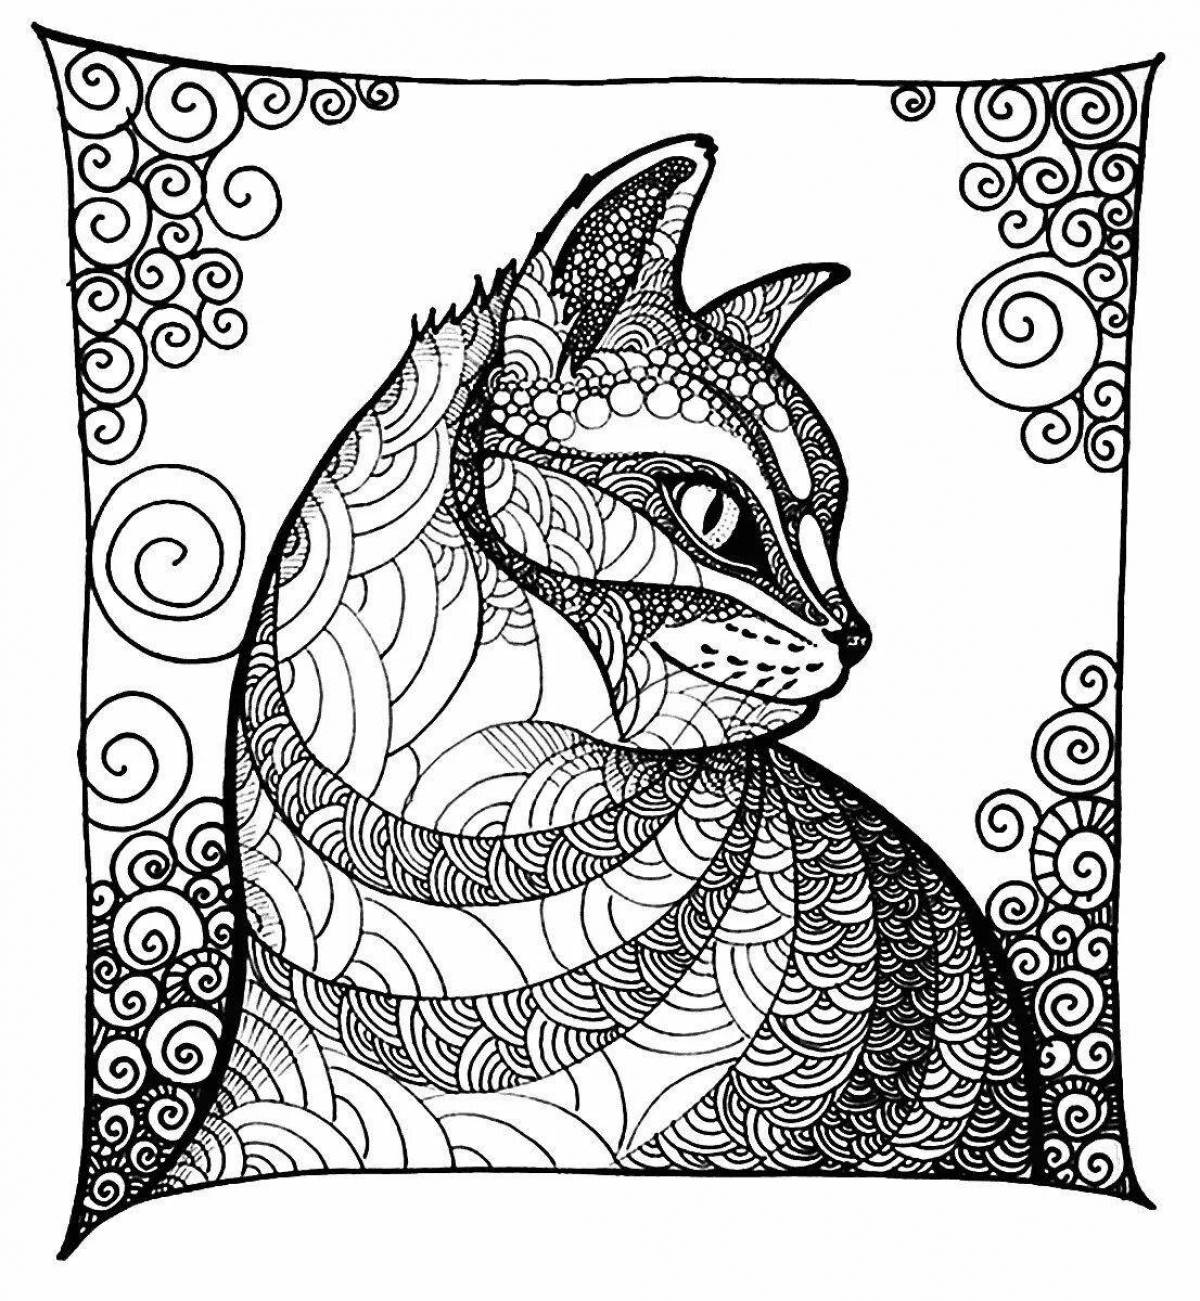 Coloring page happy patterned cat